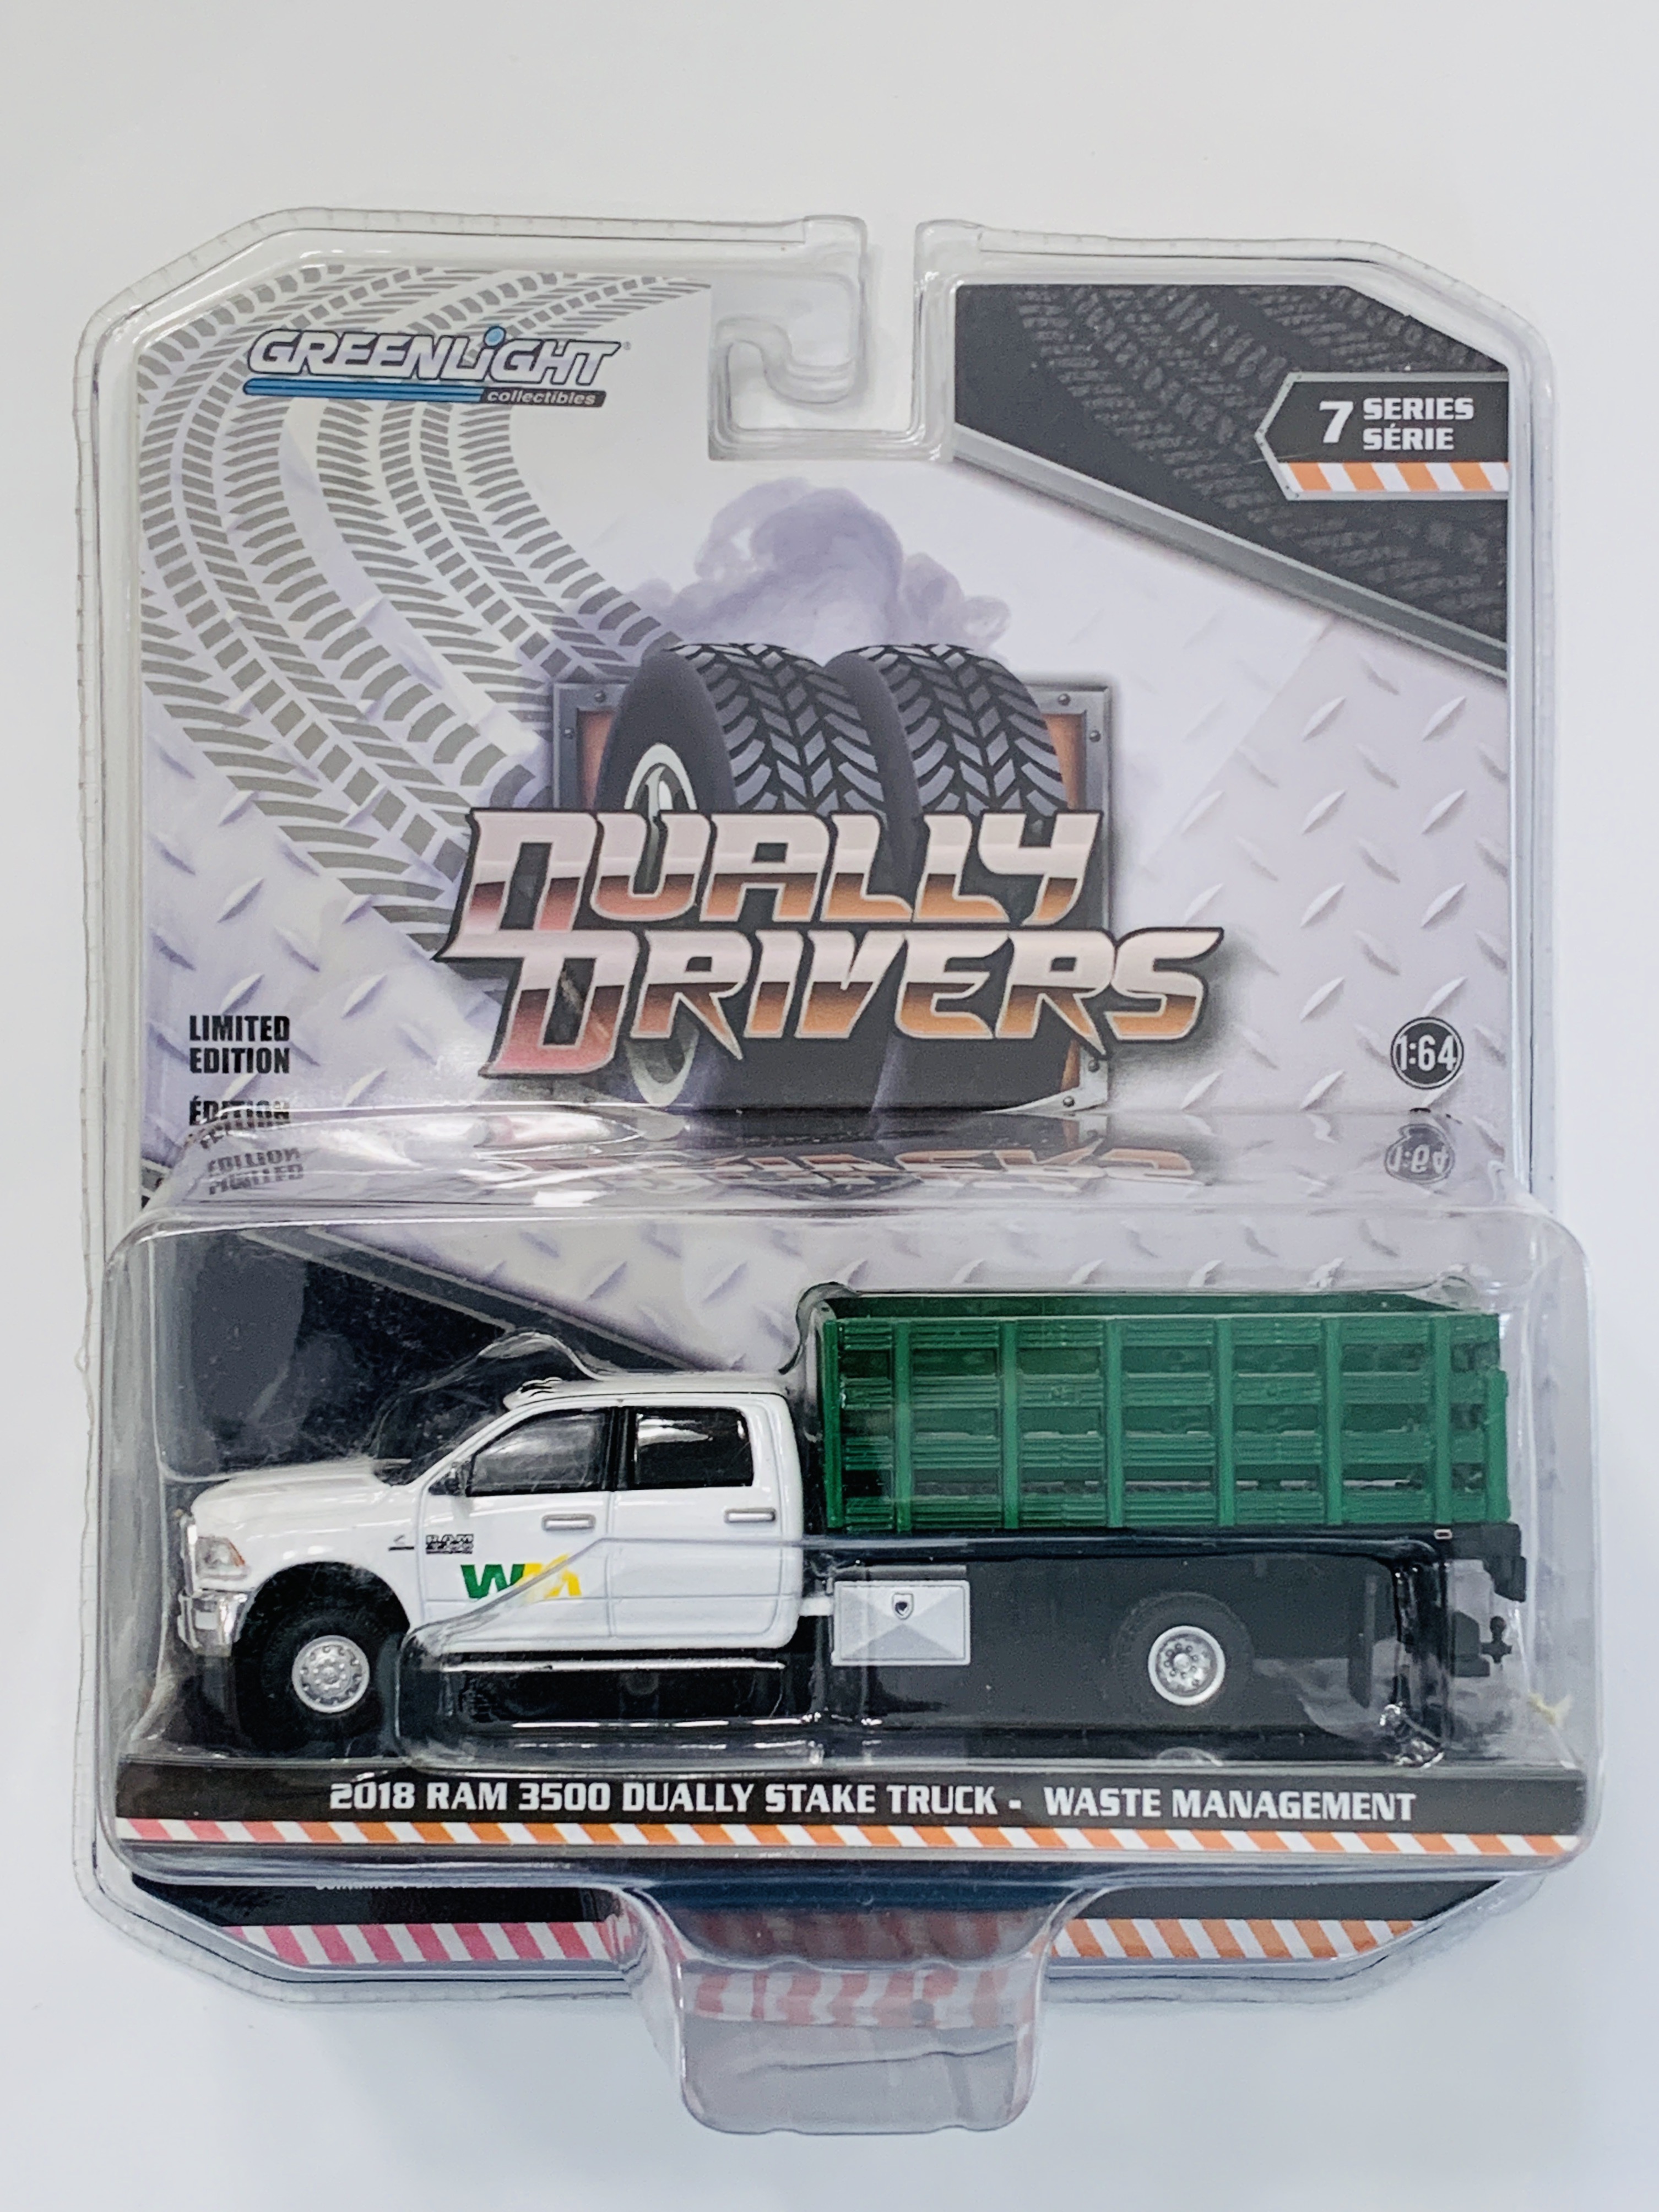 Greenlight Dually Drivers 2018 RAM 3500 Dually Stake Truck - Waste Management